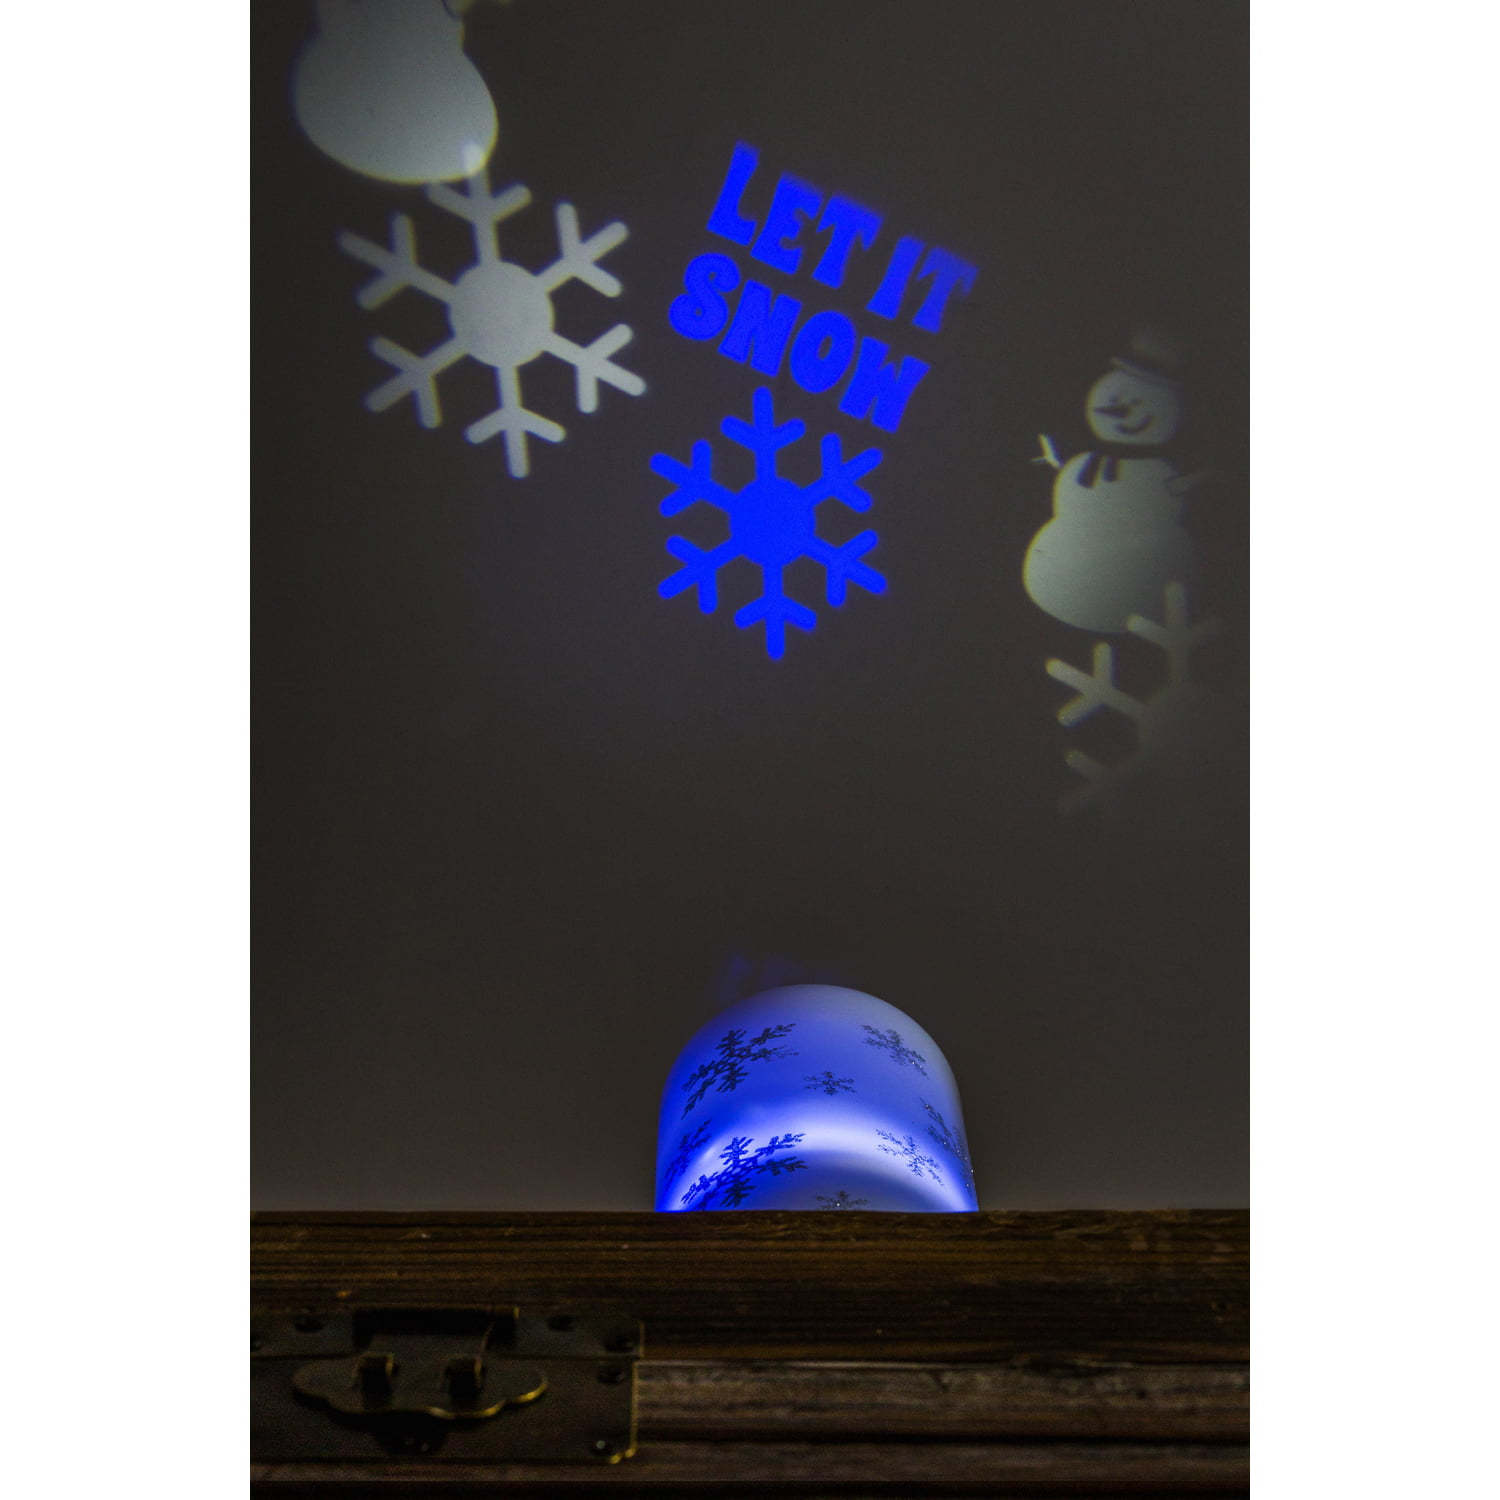 LED Snowflake Pillar Table Decor with Projected Icons